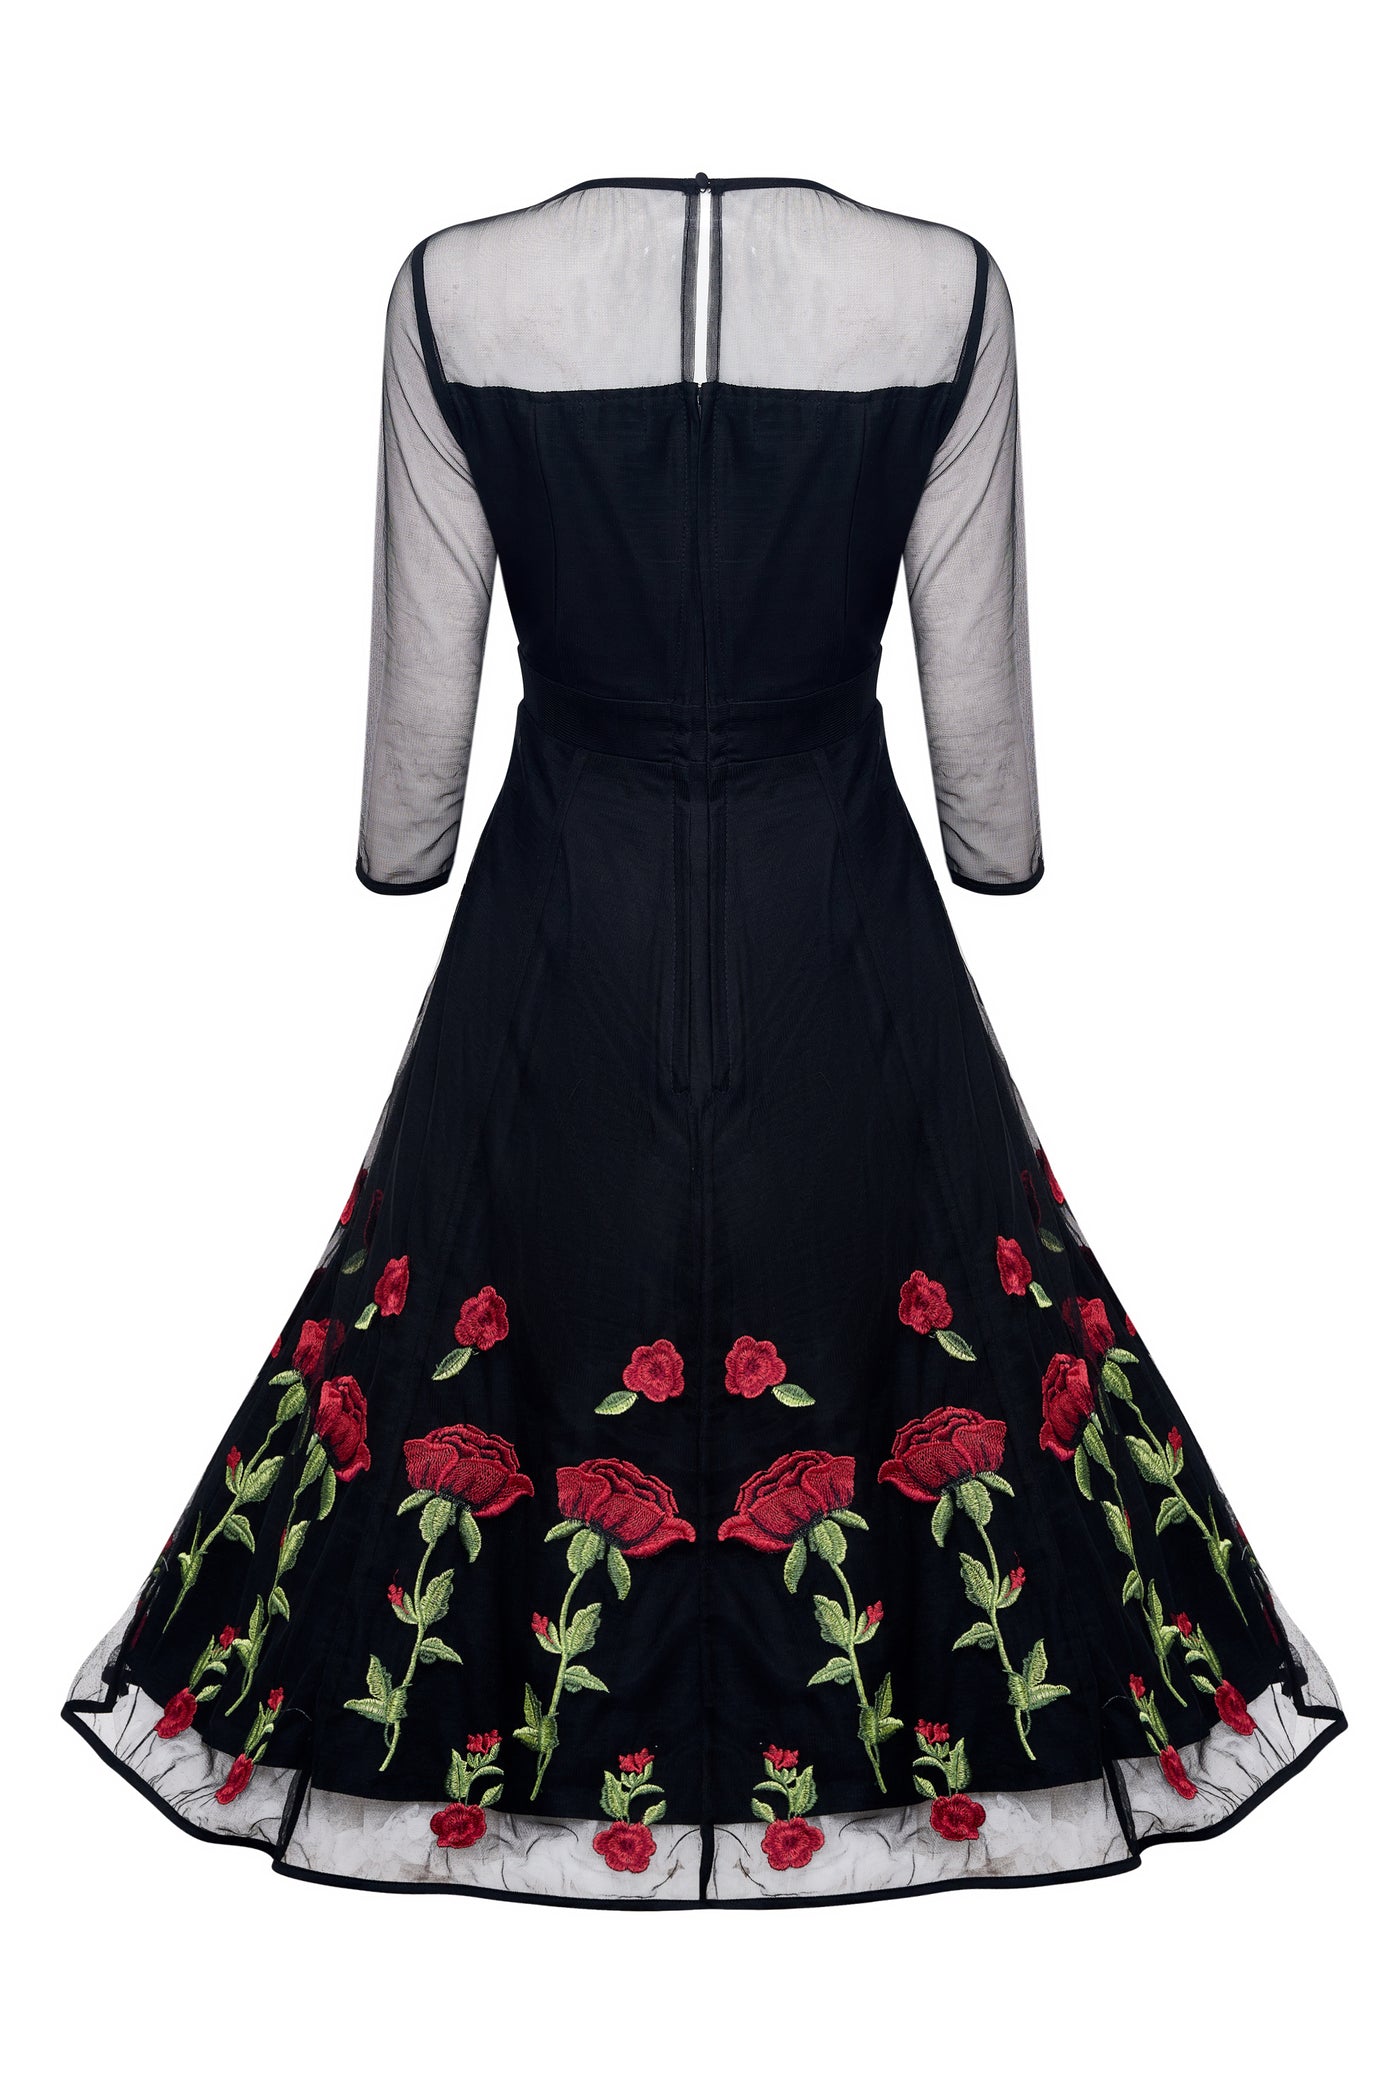 Black Evening Mesh Dress with Embroidered Red Roses back view